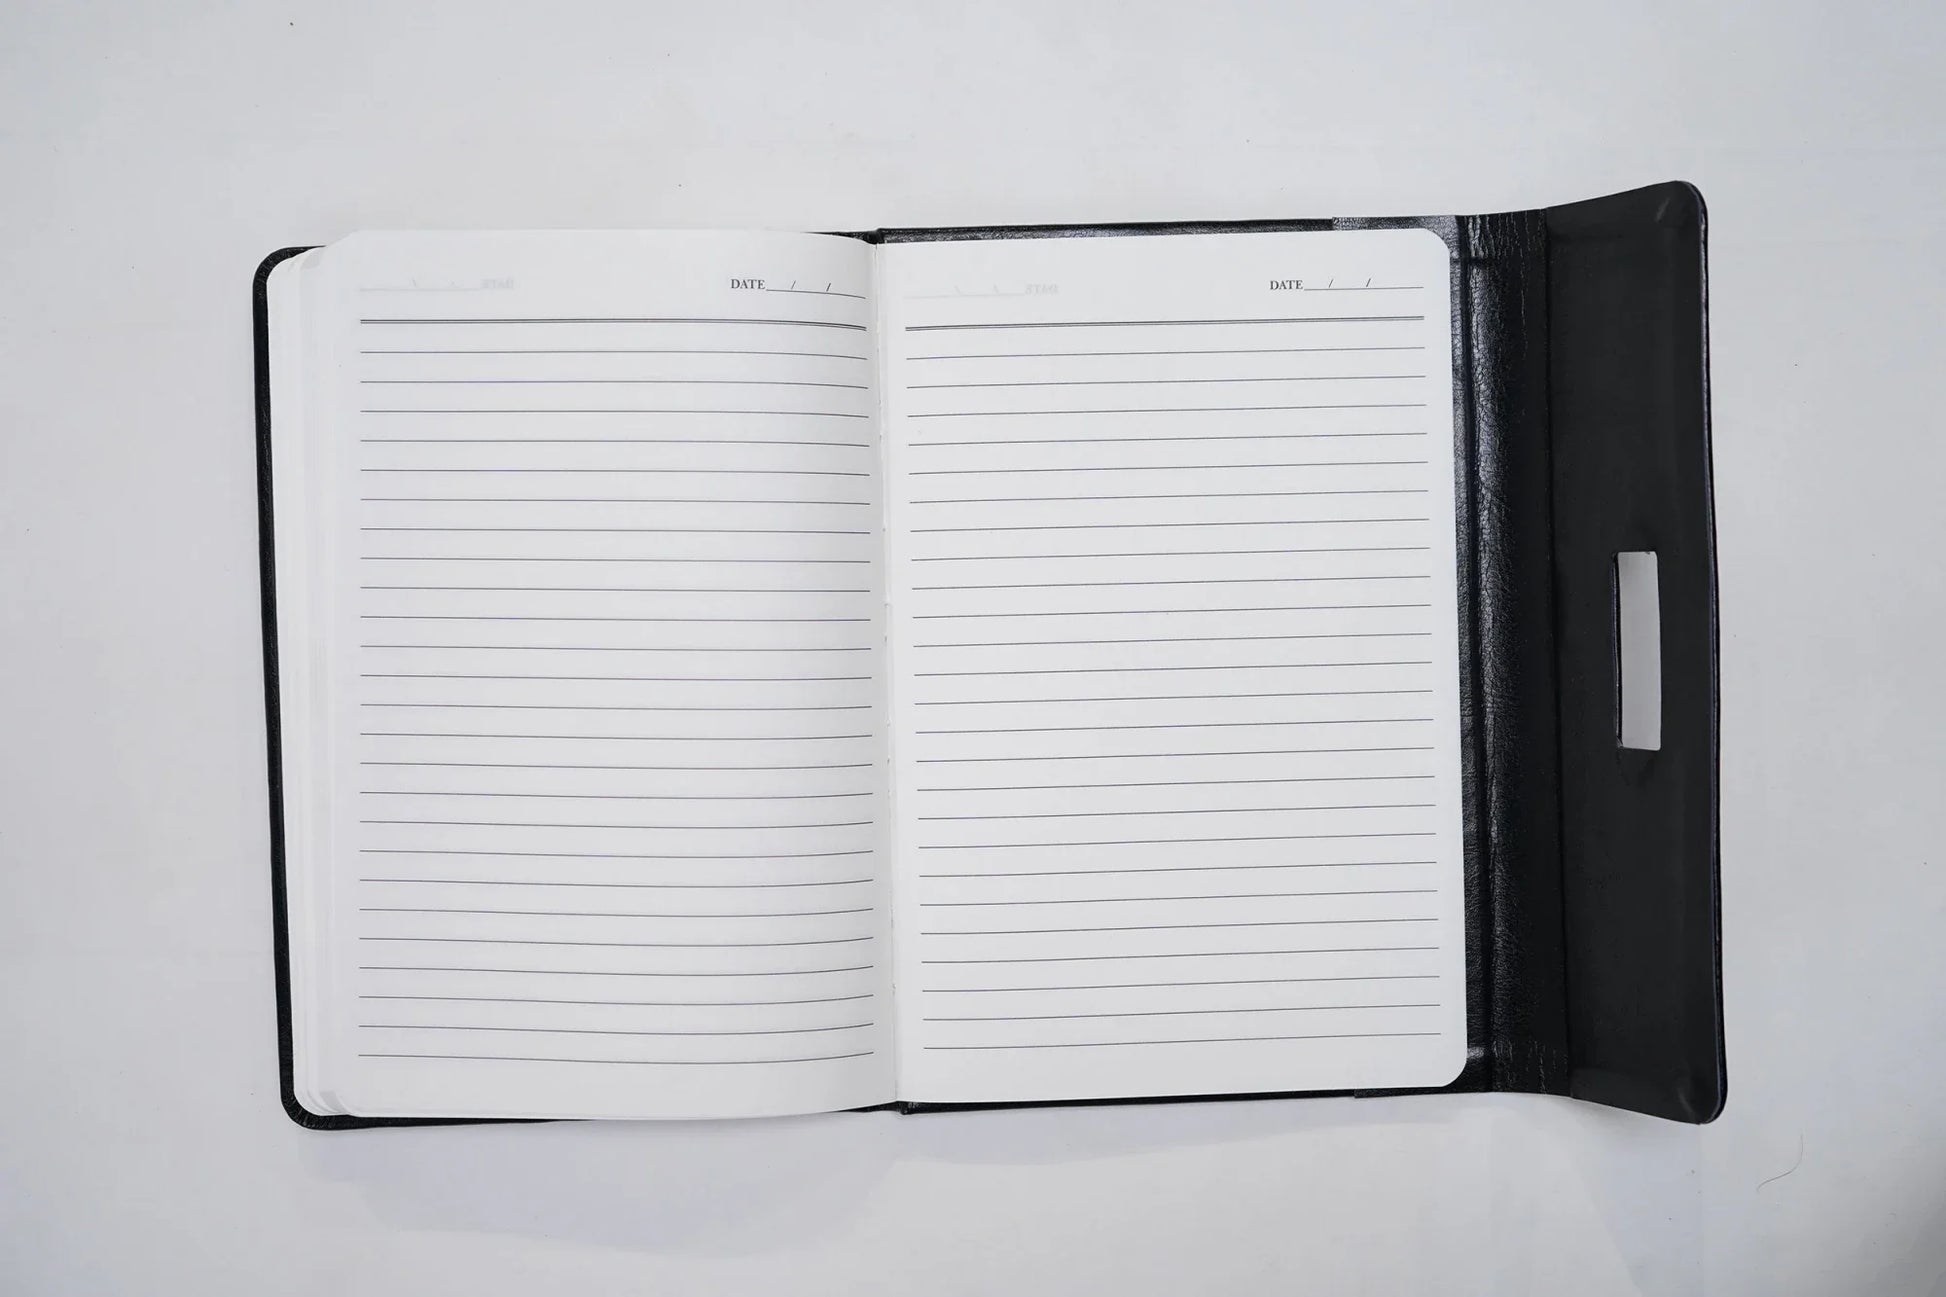 A diary is the perfect place to capture your thoughts and memories. Our diary features a high-quality leather cover and smooth, unlined pages, perfect for jotting down your reflections and musings.